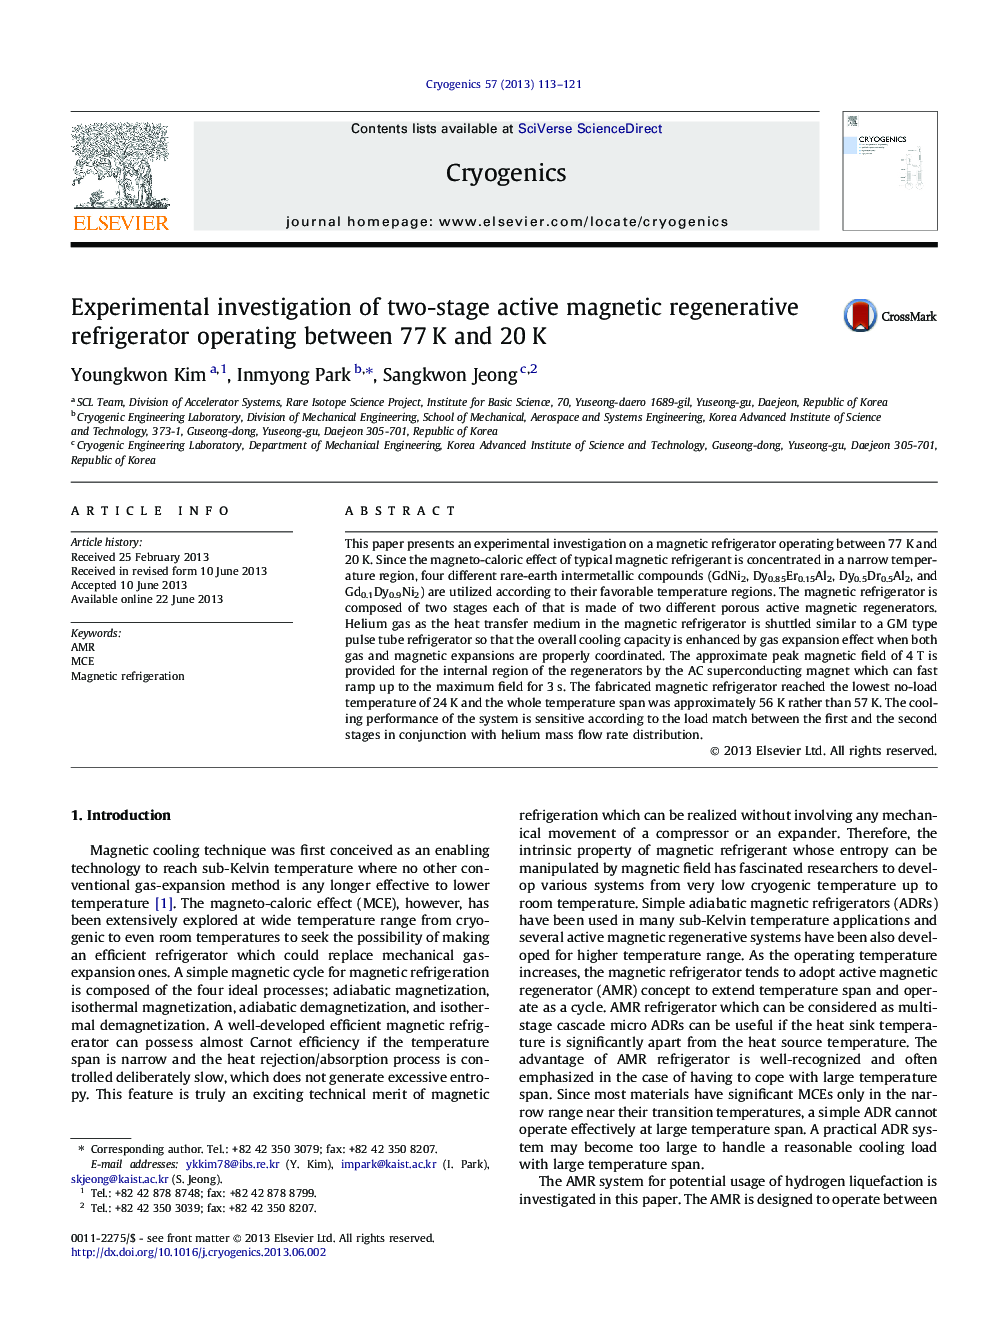 Experimental investigation of two-stage active magnetic regenerative refrigerator operating between 77 K and 20 K